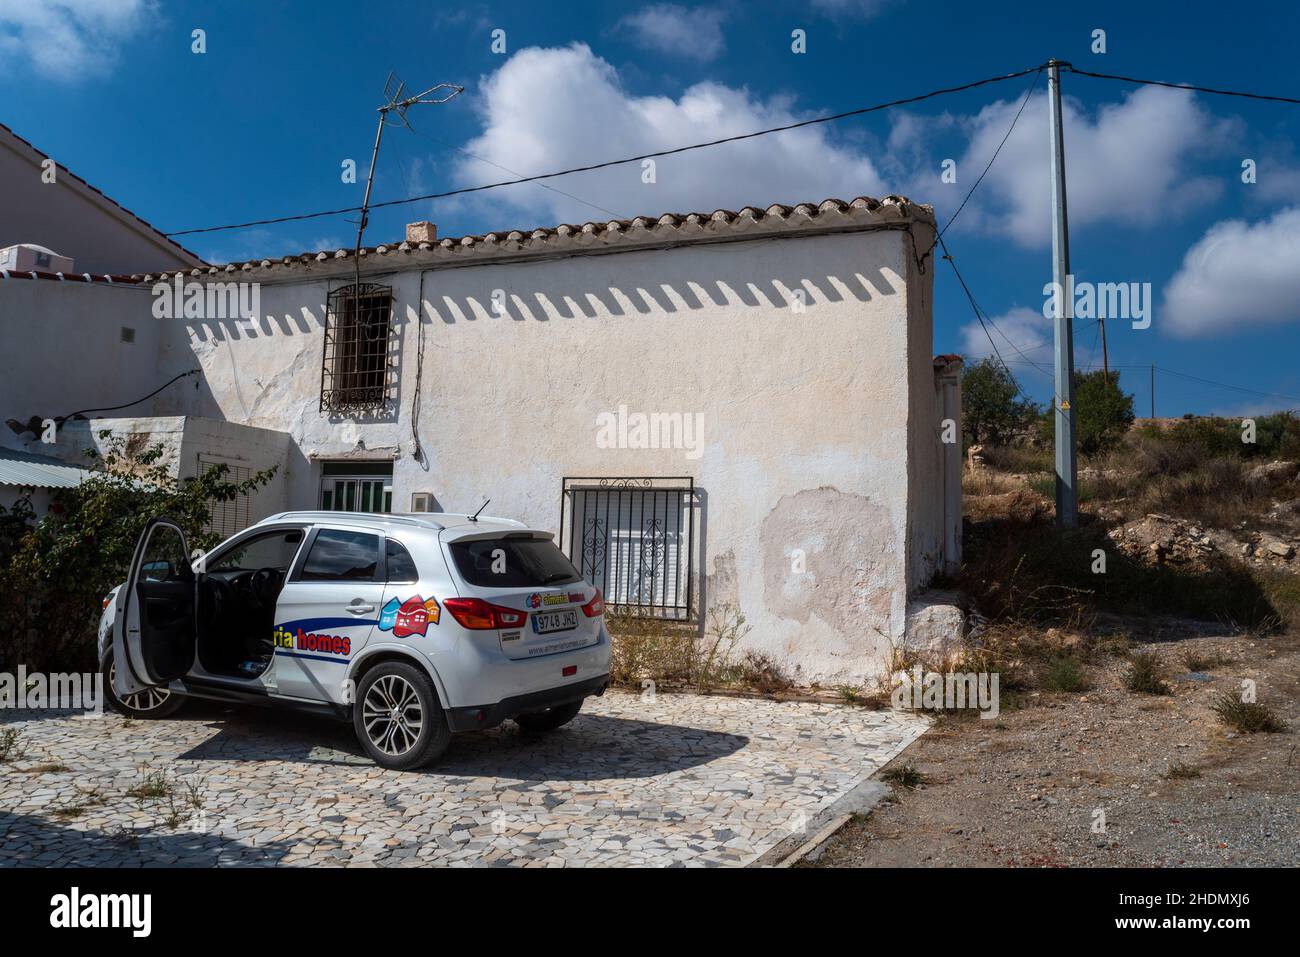 Spanish property for sale in rural area outside Albox, Almeria, Andalusia, Spain, typical of properties advertised to British ex-pats for renovation Stock Photo